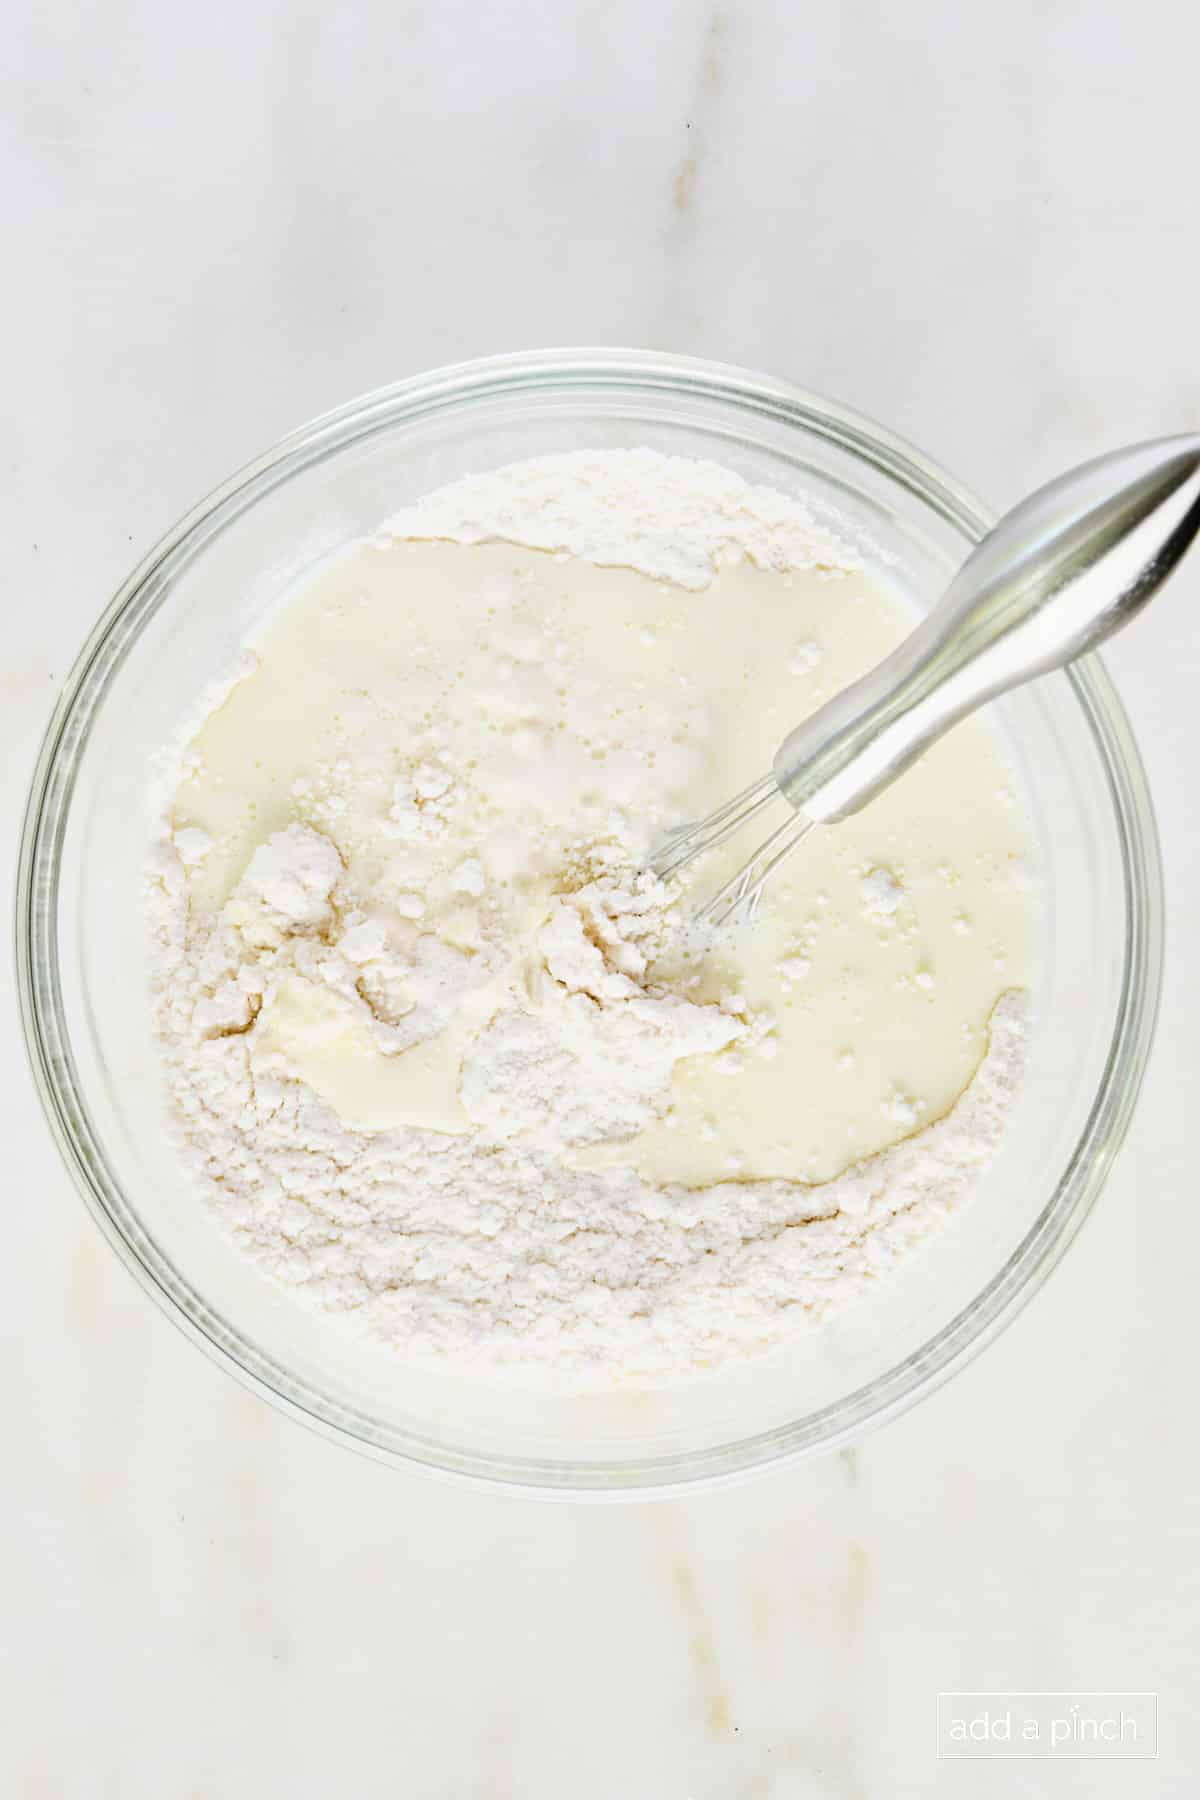 Flour mixture and milk in a glass bowl with a whisk